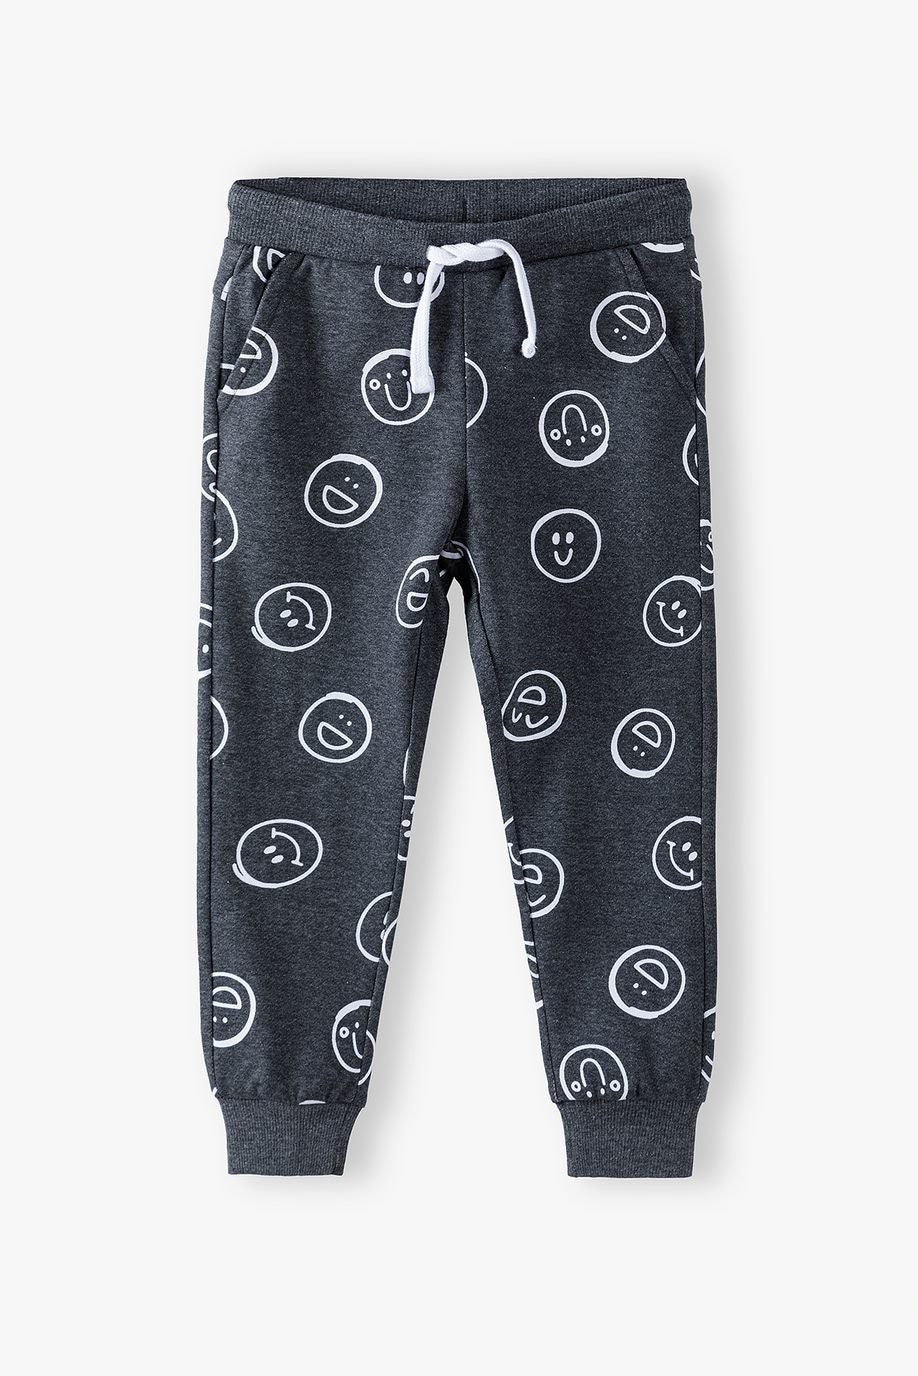 Boys' grey sweatpants with smiley faces